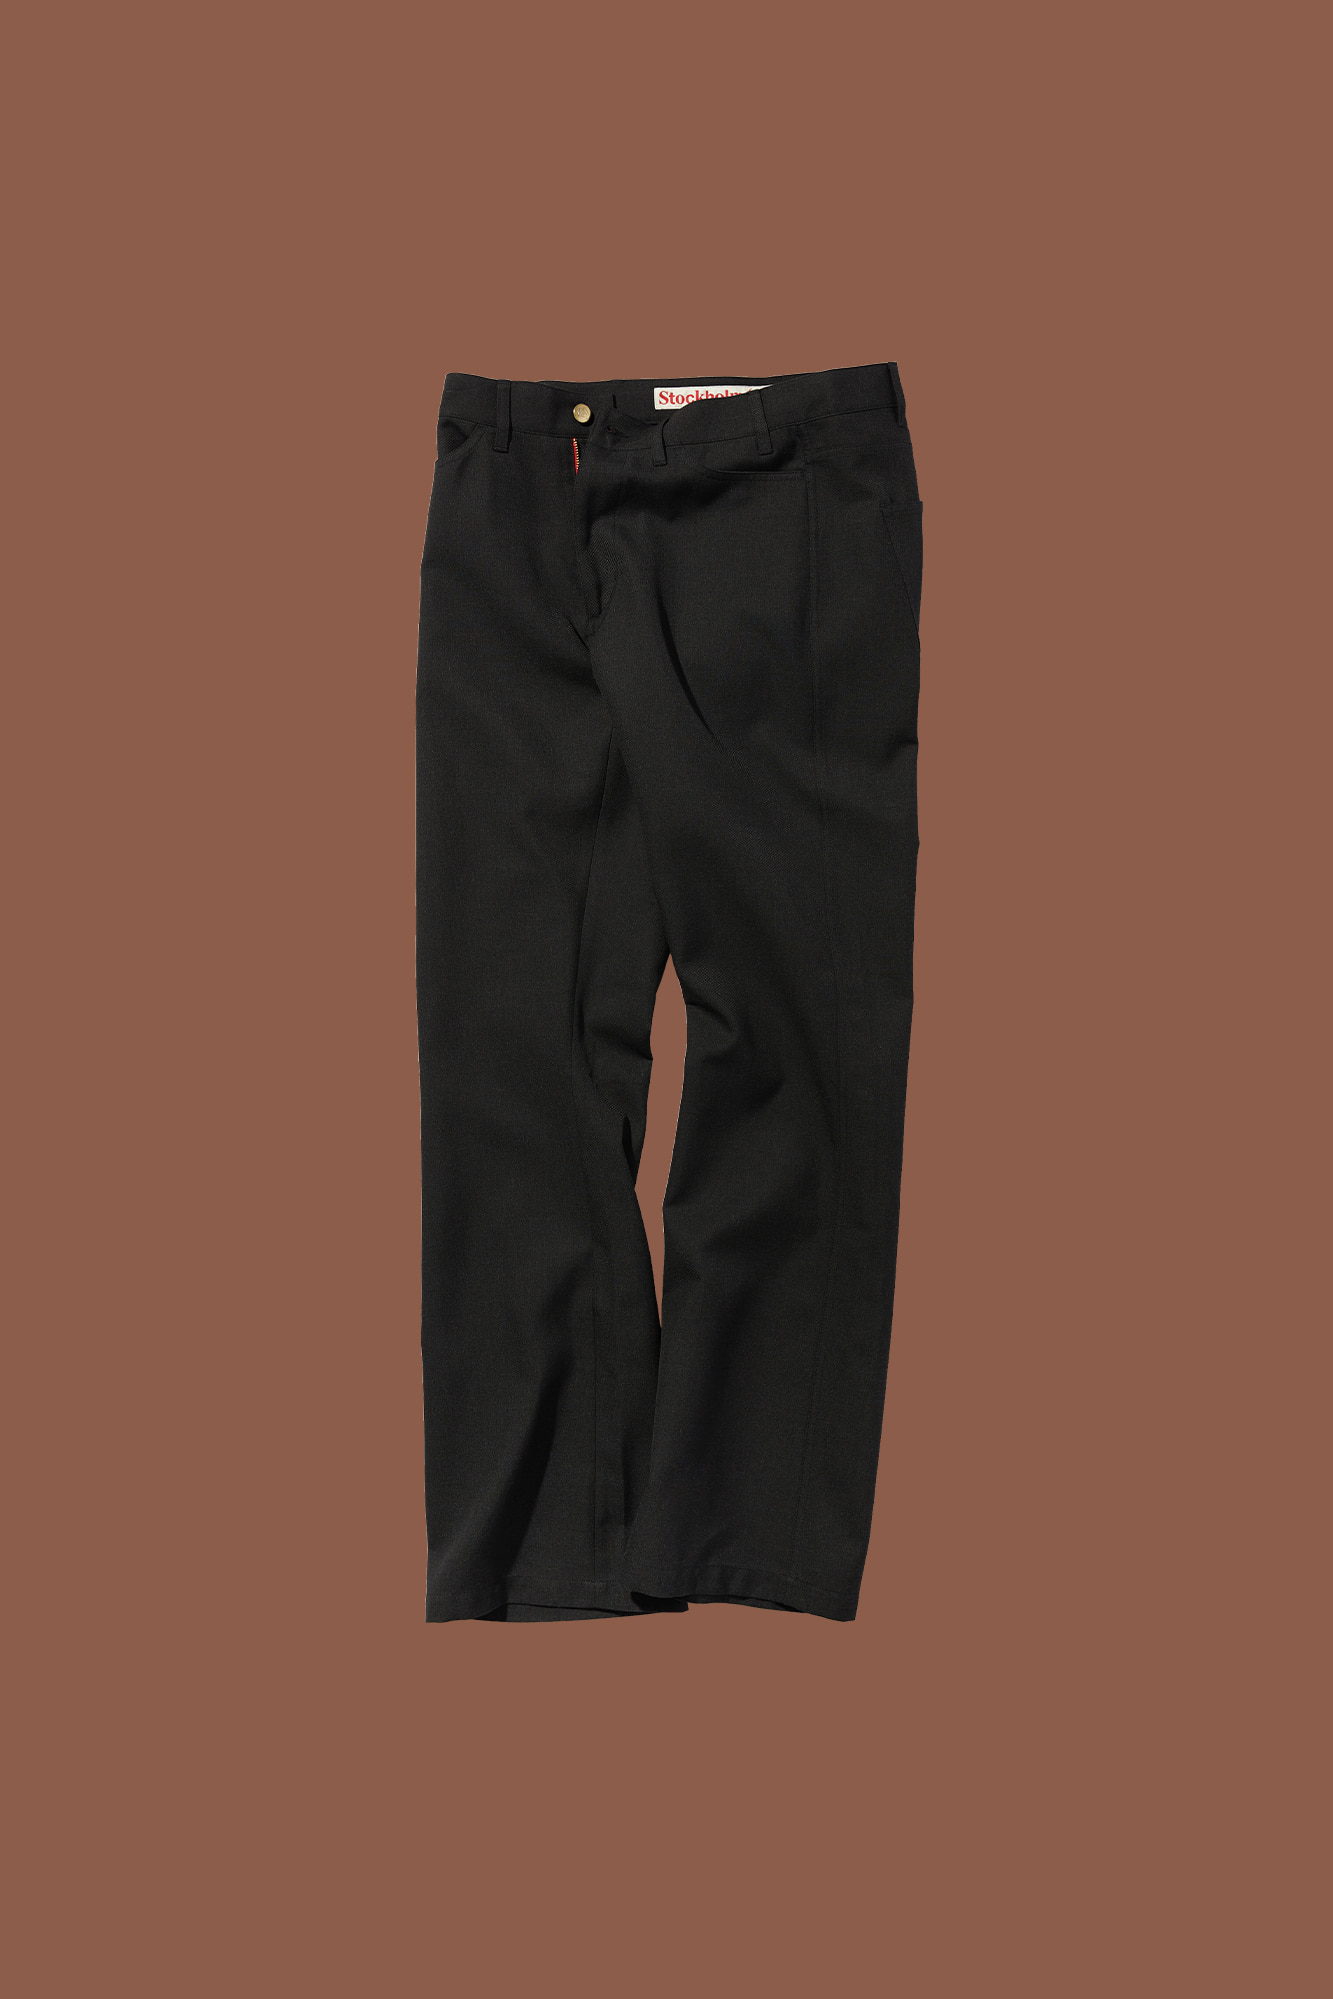 STOCKHOLM SURFBOARD CLUB FOG TROUSERS KNP014m(CHARCOAL BLACK)